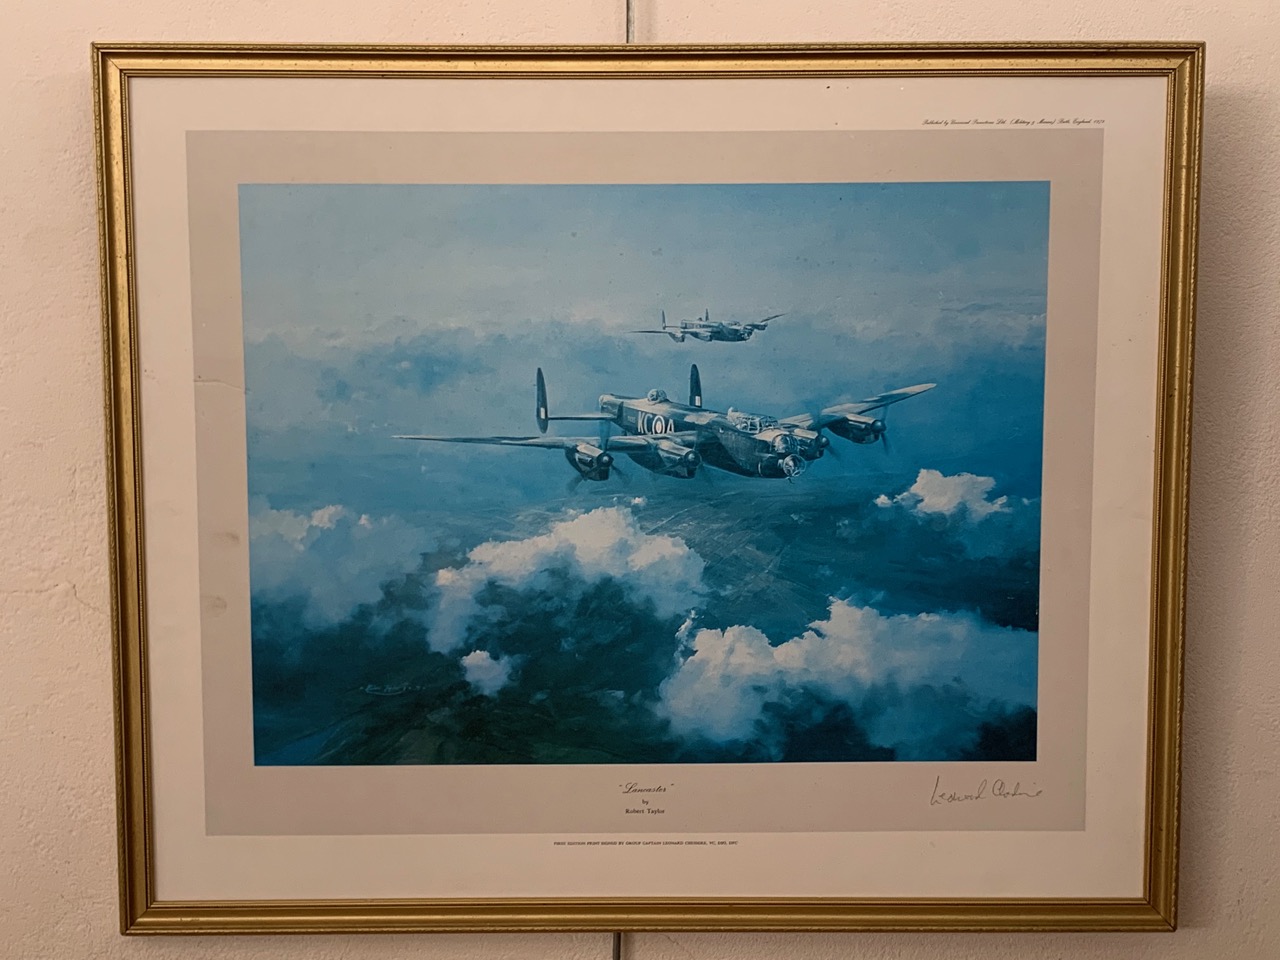 Robert Taylor, "Lancaster", a study of two RAF Lancaster bombers in flight, first edition print